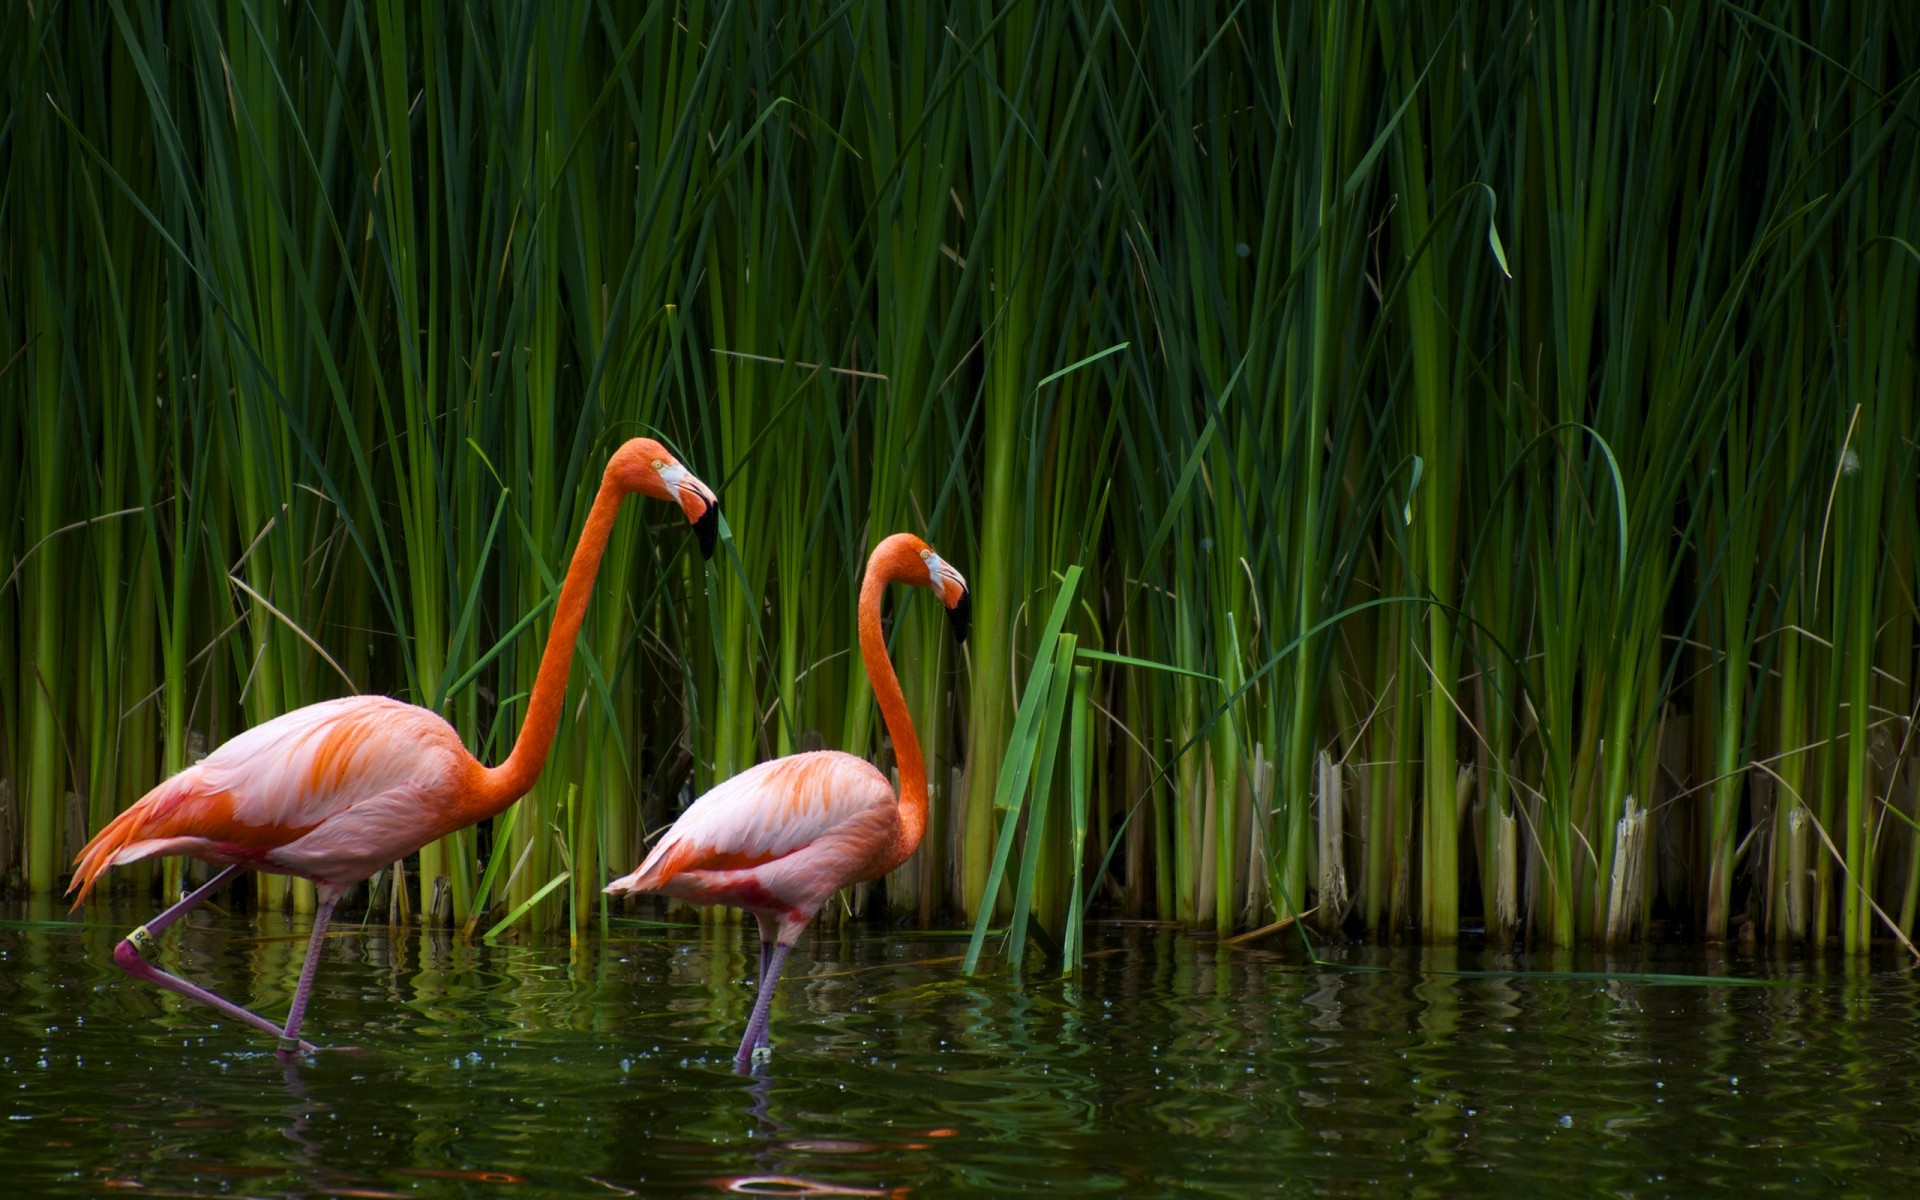 flamingo nature lake grass water summer pool color birds plants